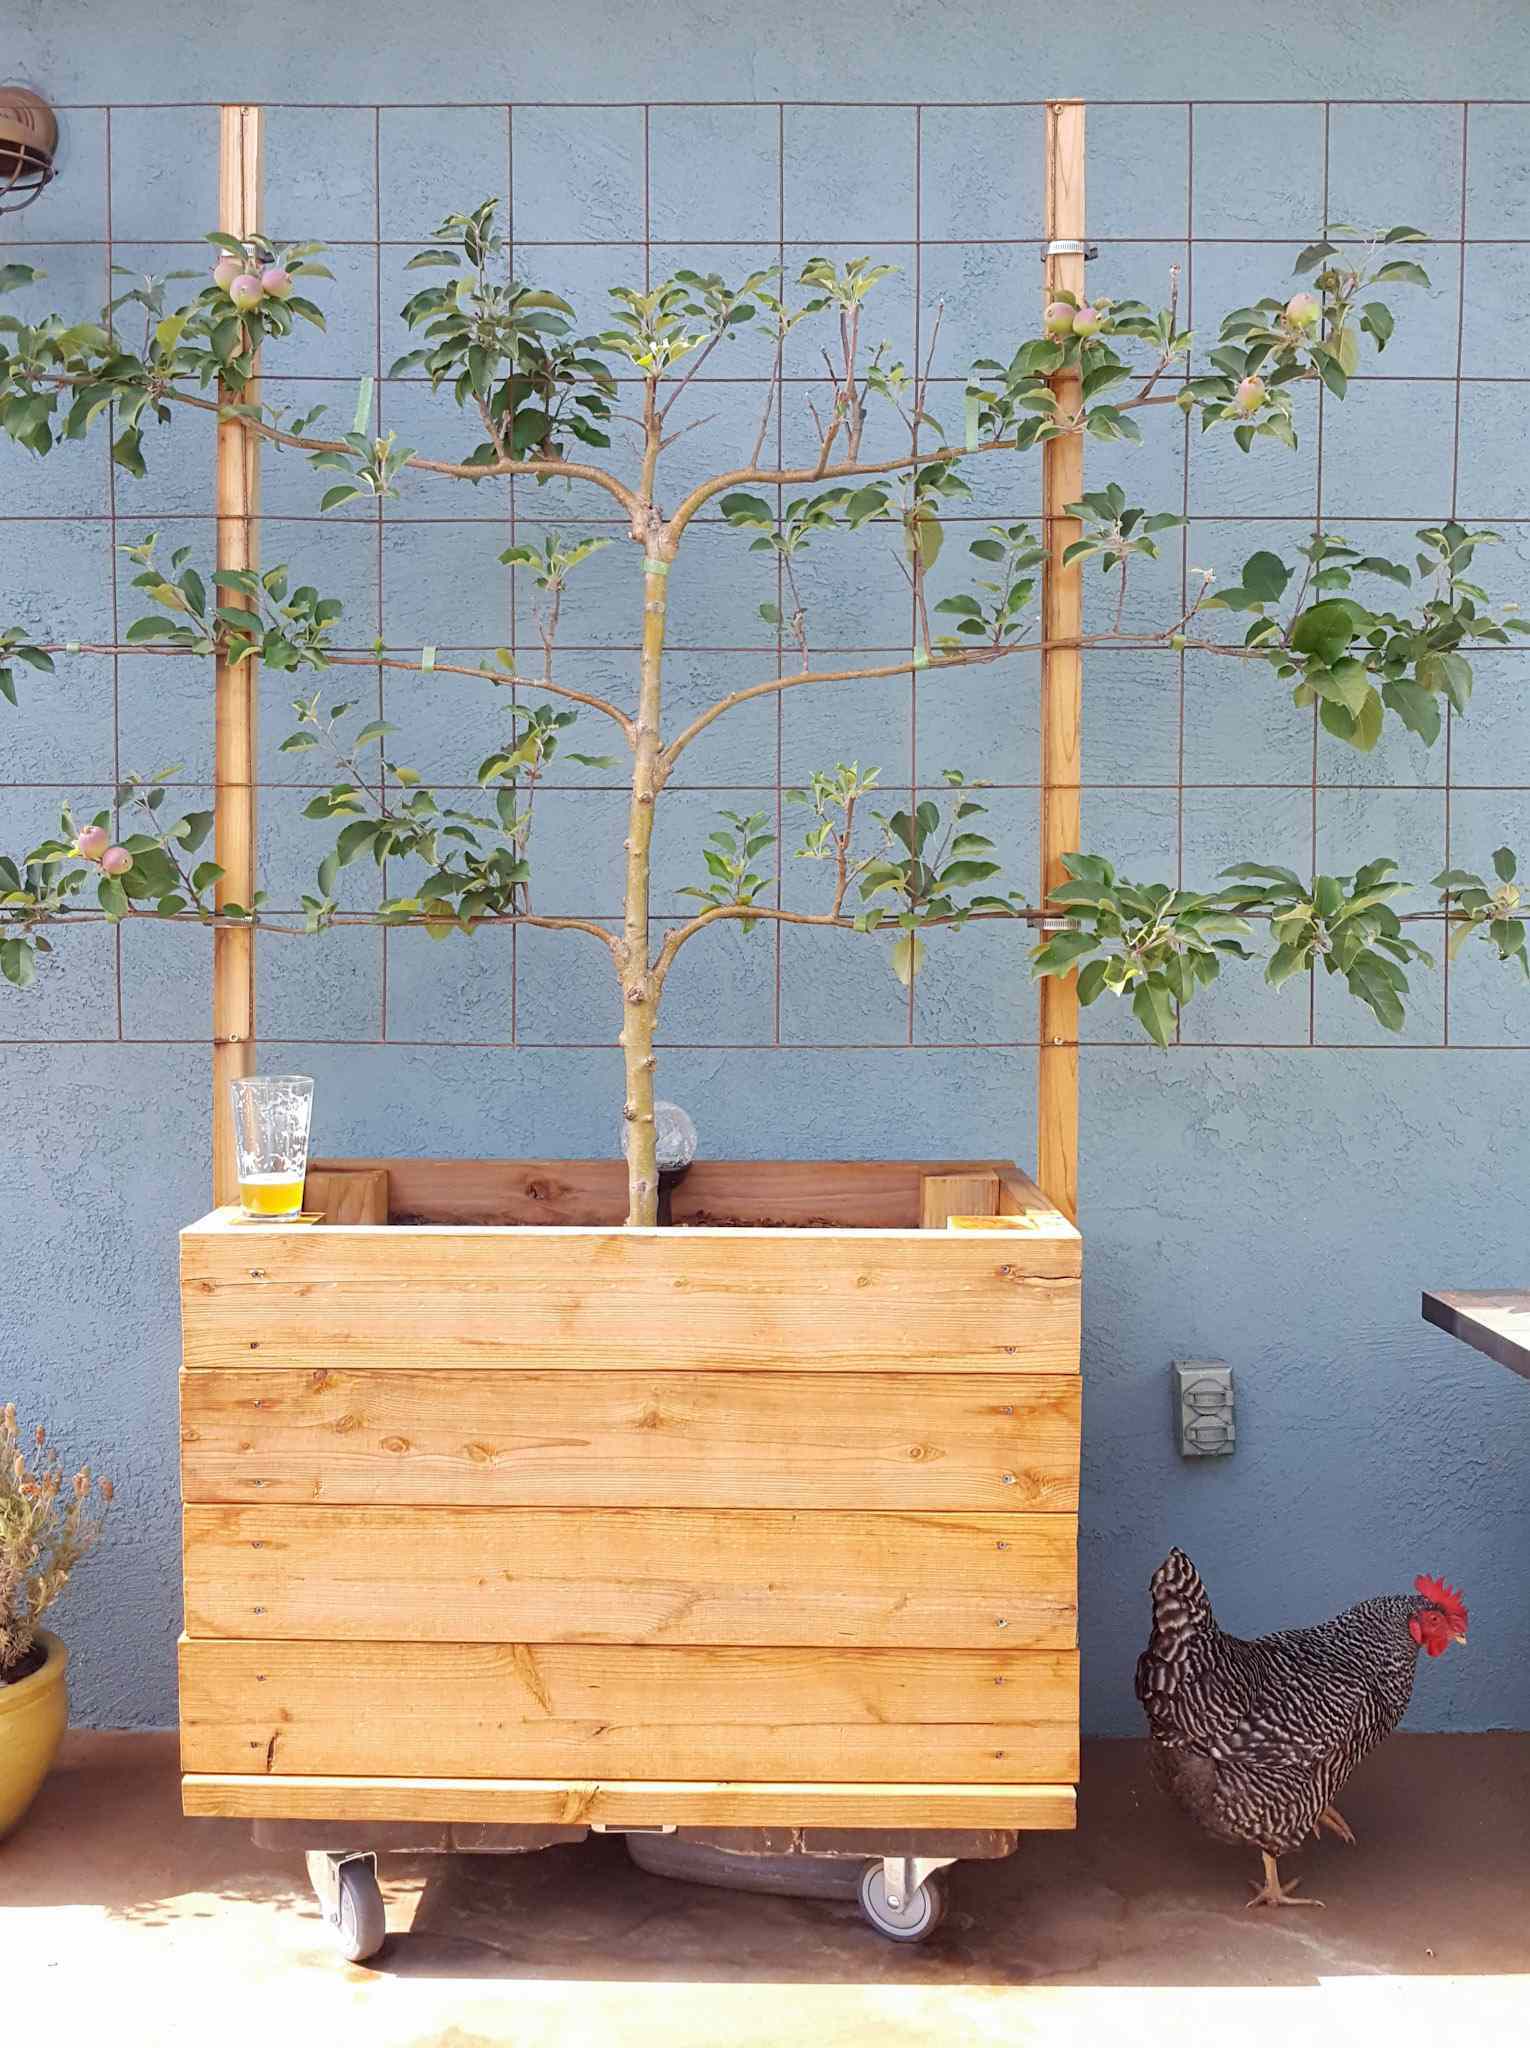 A raised wooden bed on wheels is shown. The box contains an espaliere apple tree with concrete remesh serving as its trellis. There is a Barred Rock chicken on the ground next to the box. 